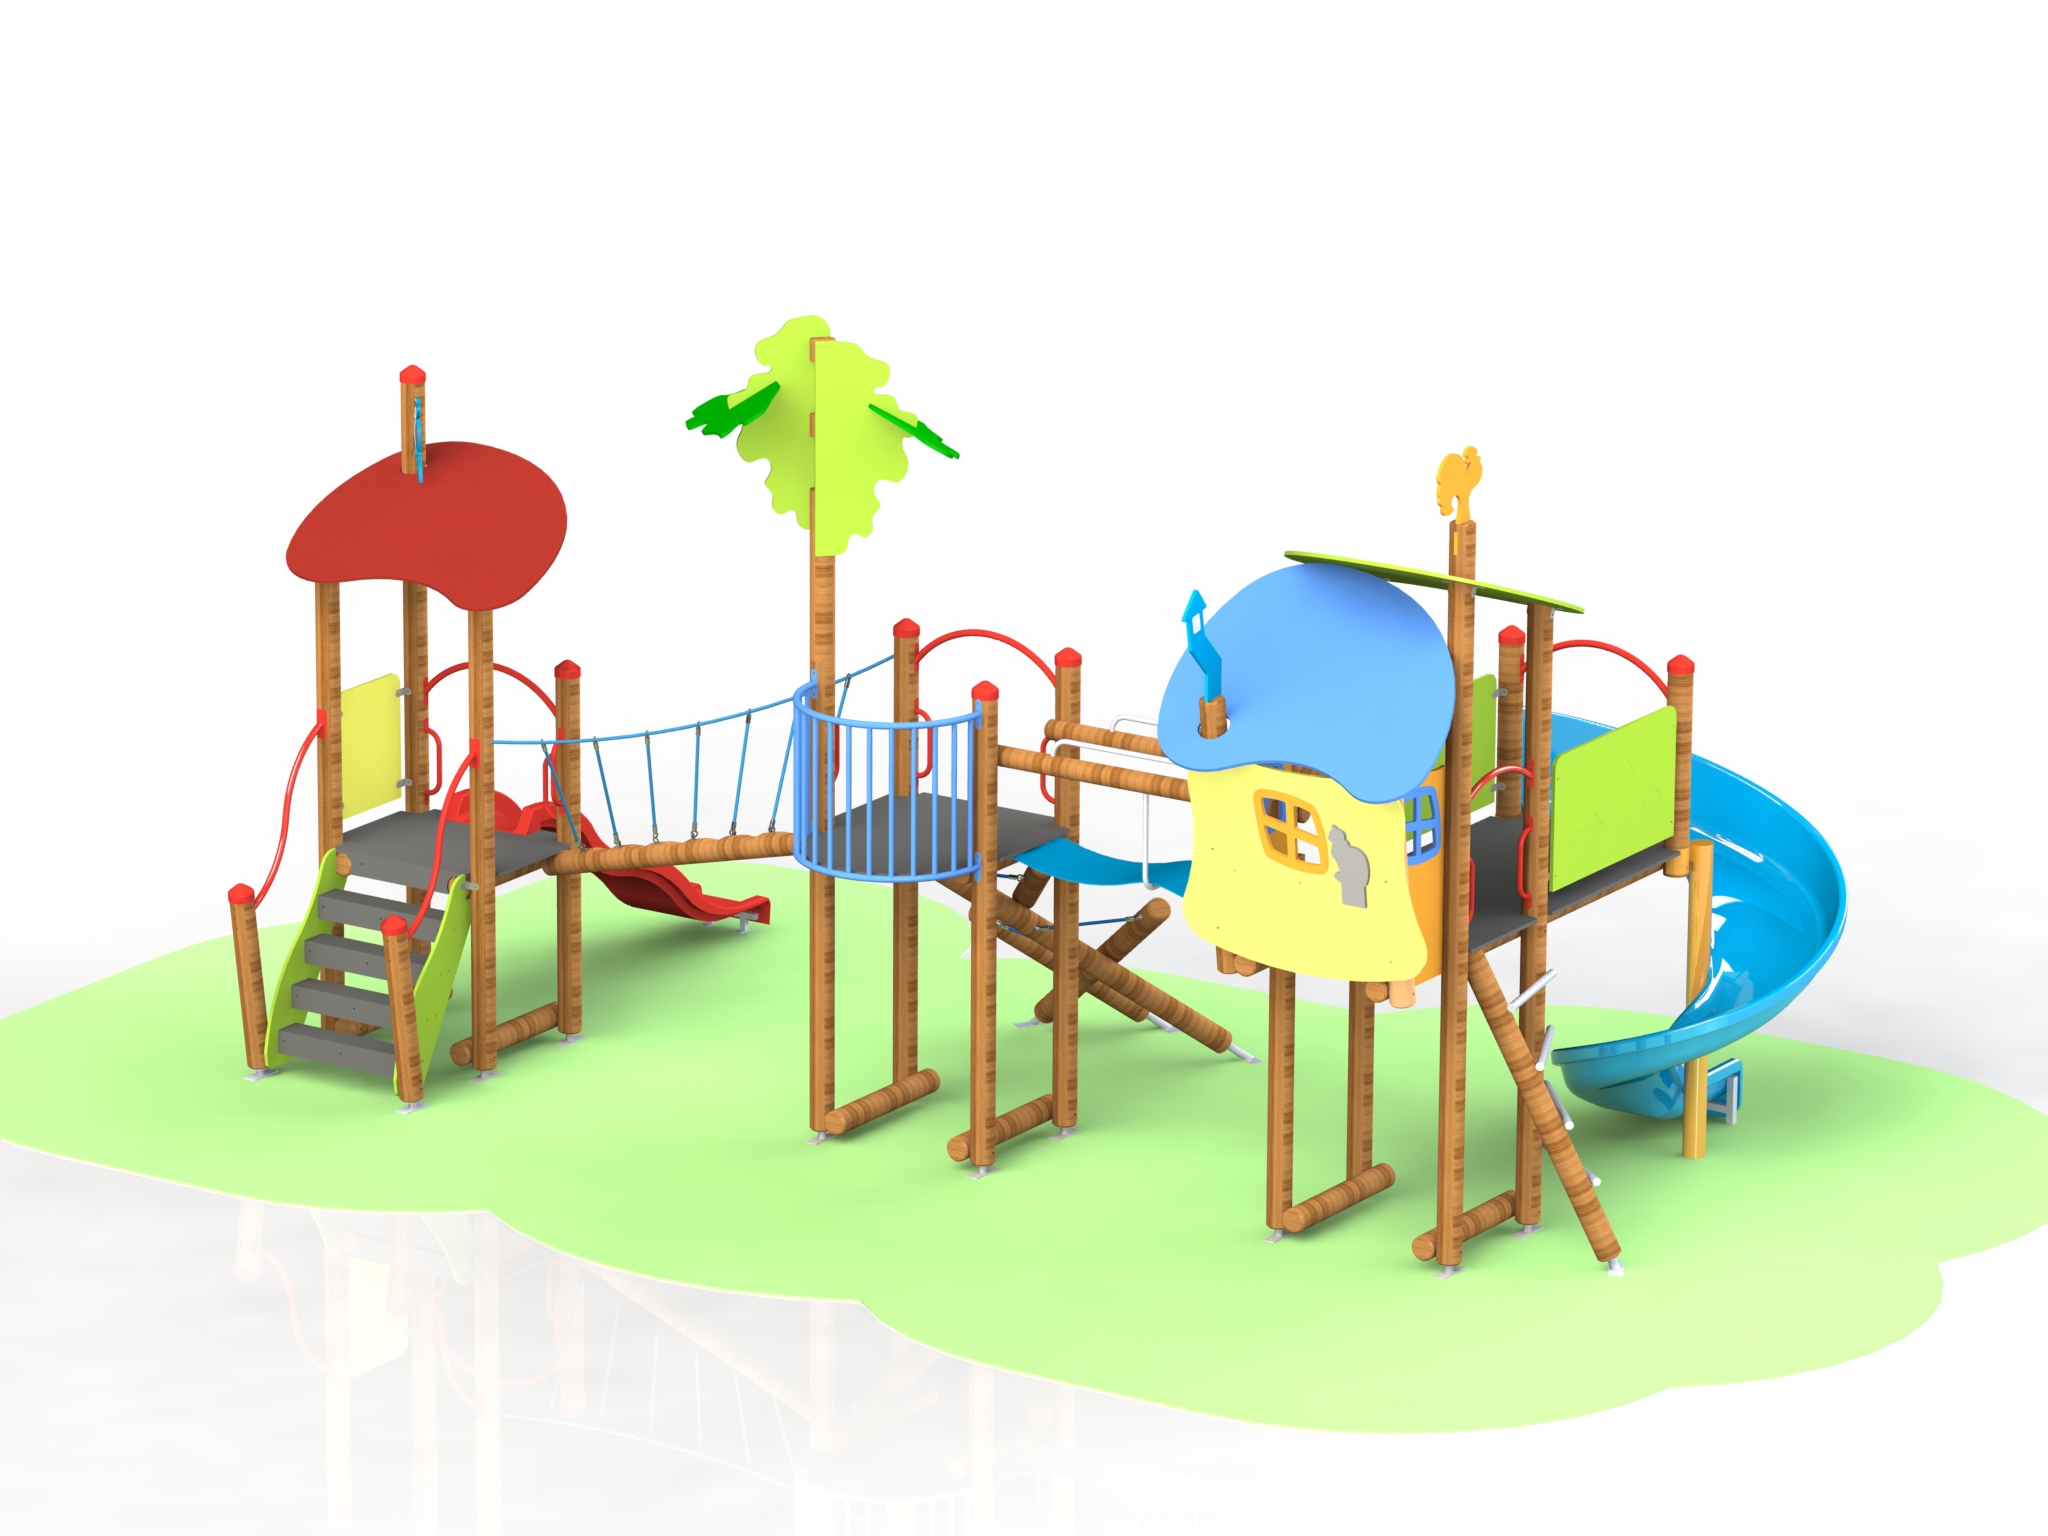 Combined children play facility, Г50 model